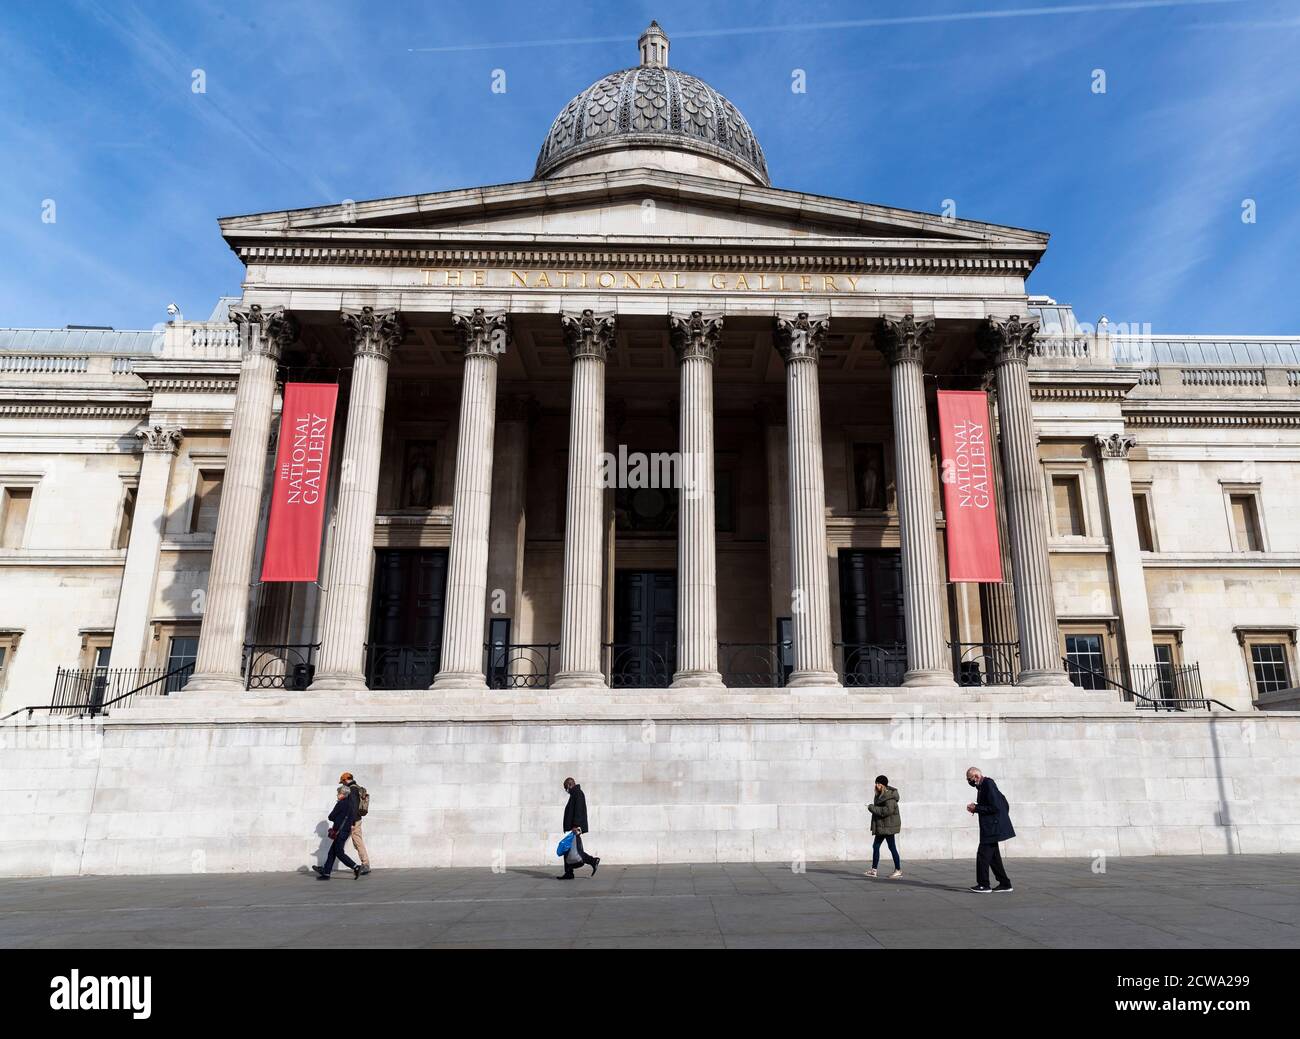 (200929) -- LONDON, Sept. 29, 2020 (Xinhua) -- People walk past the National Gallery in London, Britain, on Sept. 28, 2020.  Global COVID-19 deaths reached the grim milestone of 1 million on Monday, according to the Center for Systems Science and Engineering (CSSE) at Johns Hopkins University. (Xinhua/Han Yan) Stock Photo